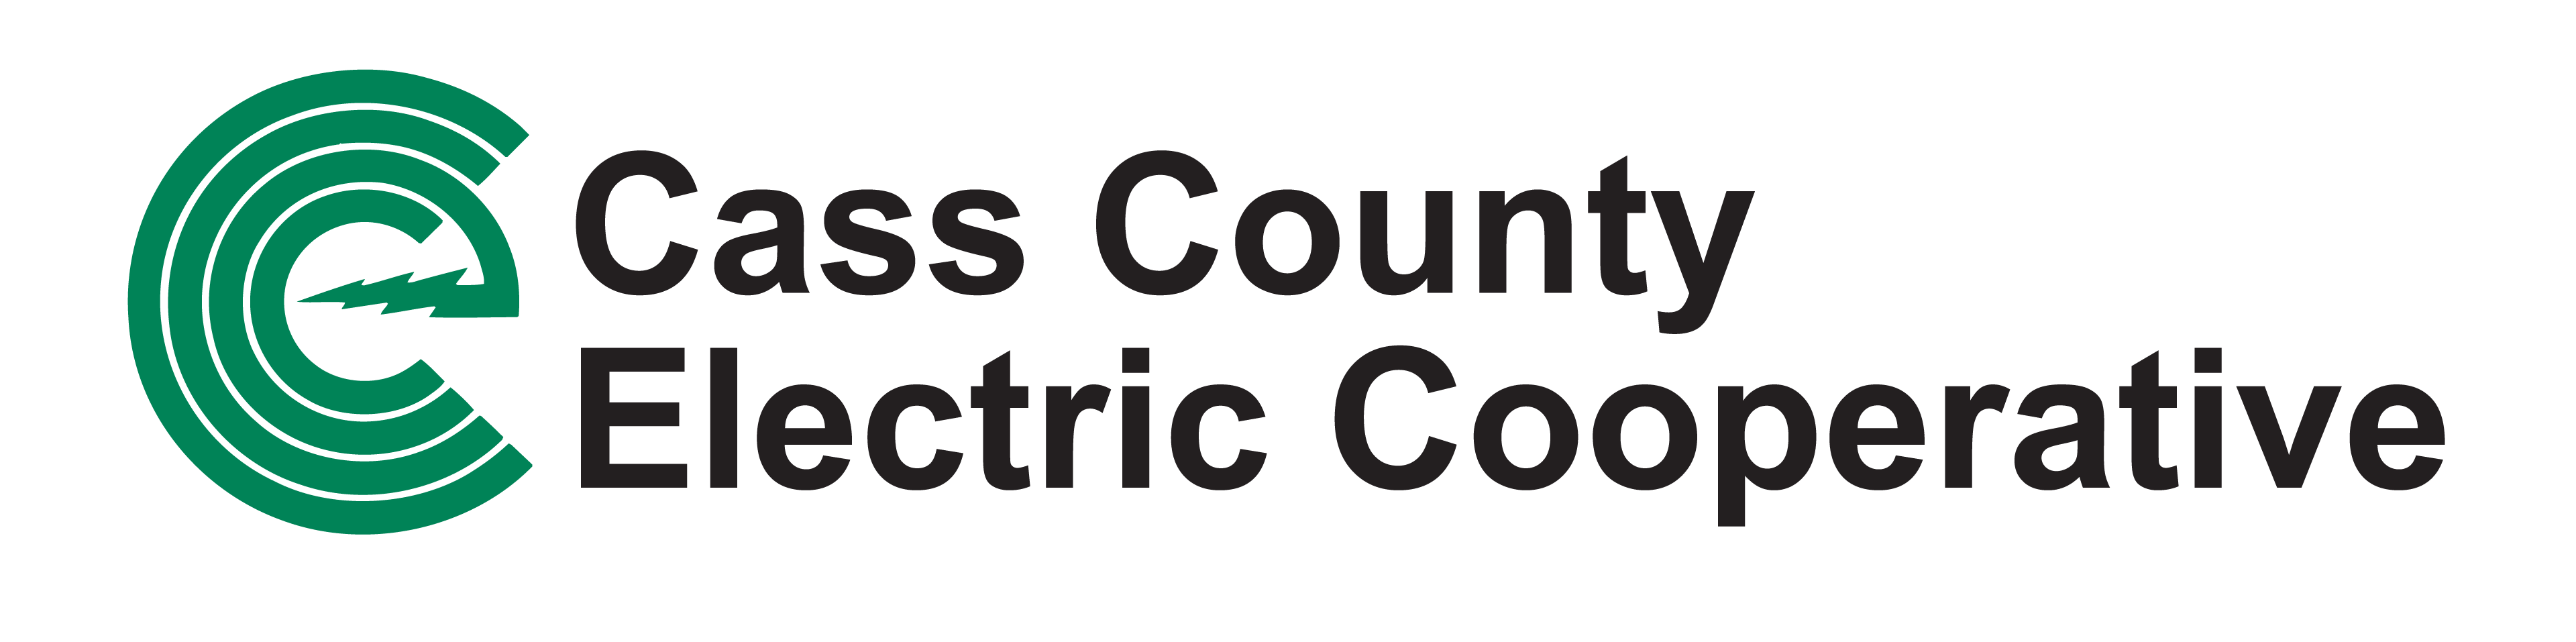 Cass County Electric Logo